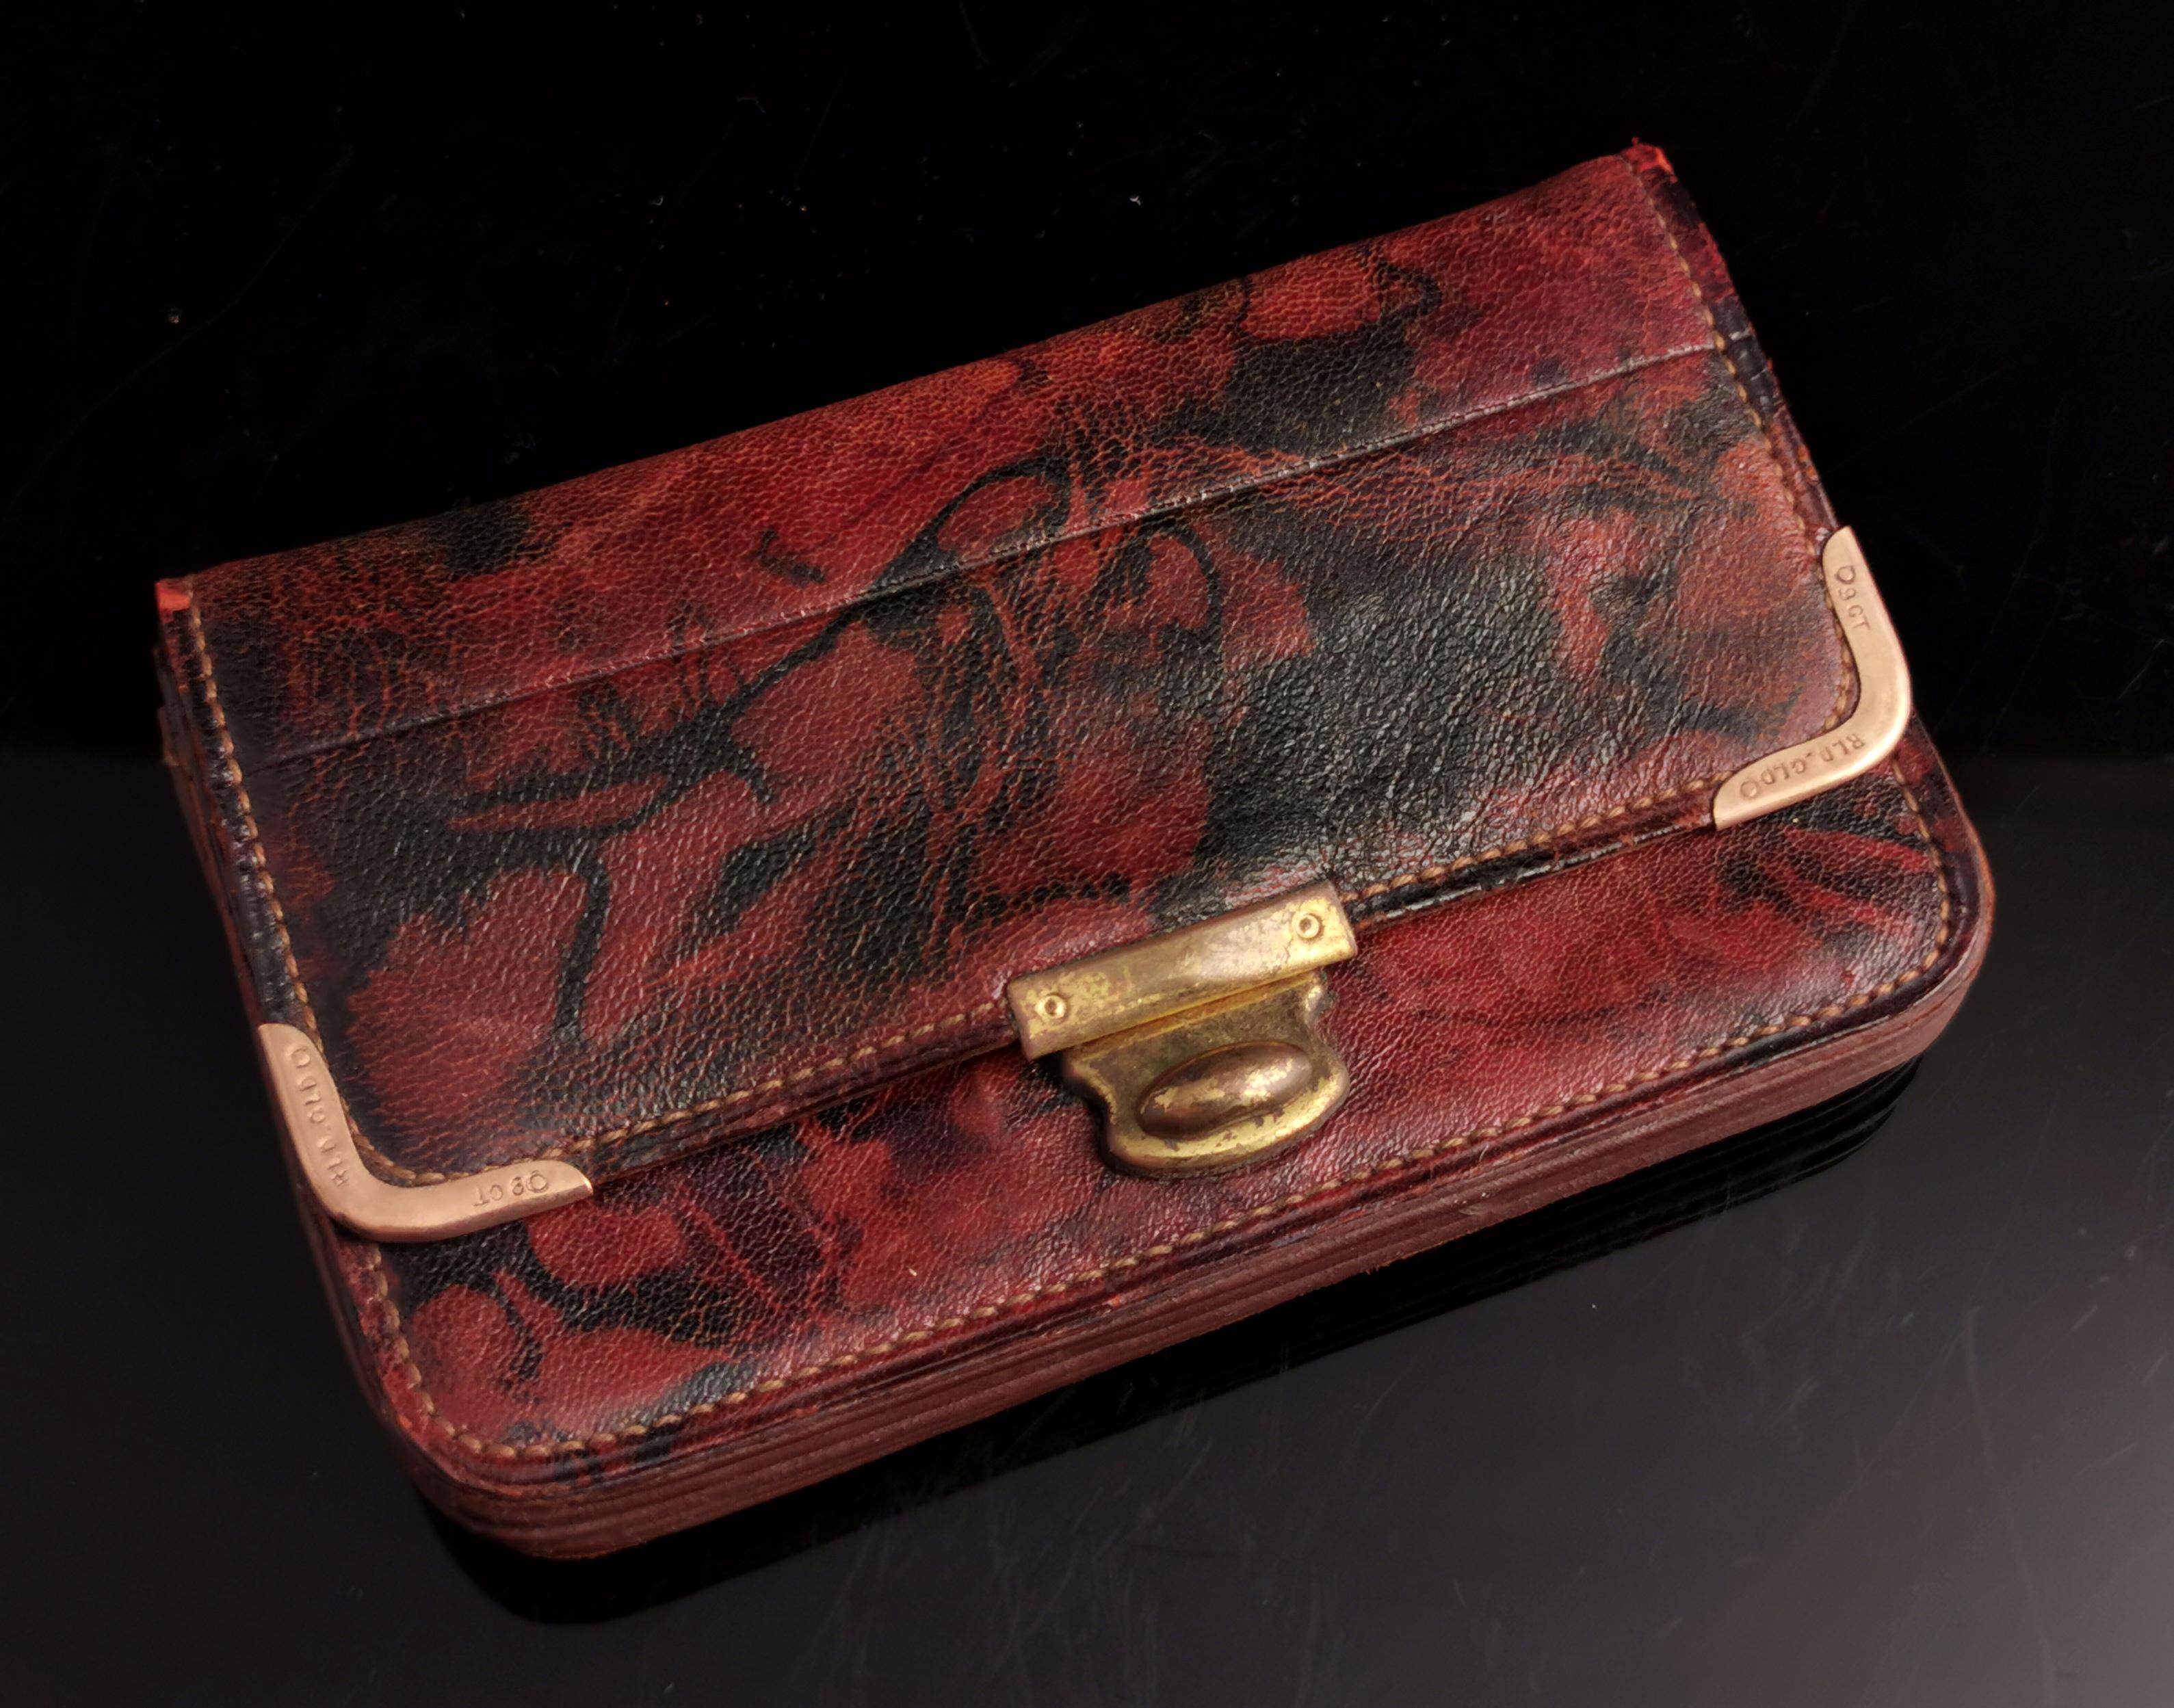 A seriously stylish vintage c1940s marbled leather purse or wallet.

Attractive red / marbled, super soft Persian leather with 9ct Rolled gold corners and a brass push clasp.

Internally it has multiple compartments with gilt lettering, old